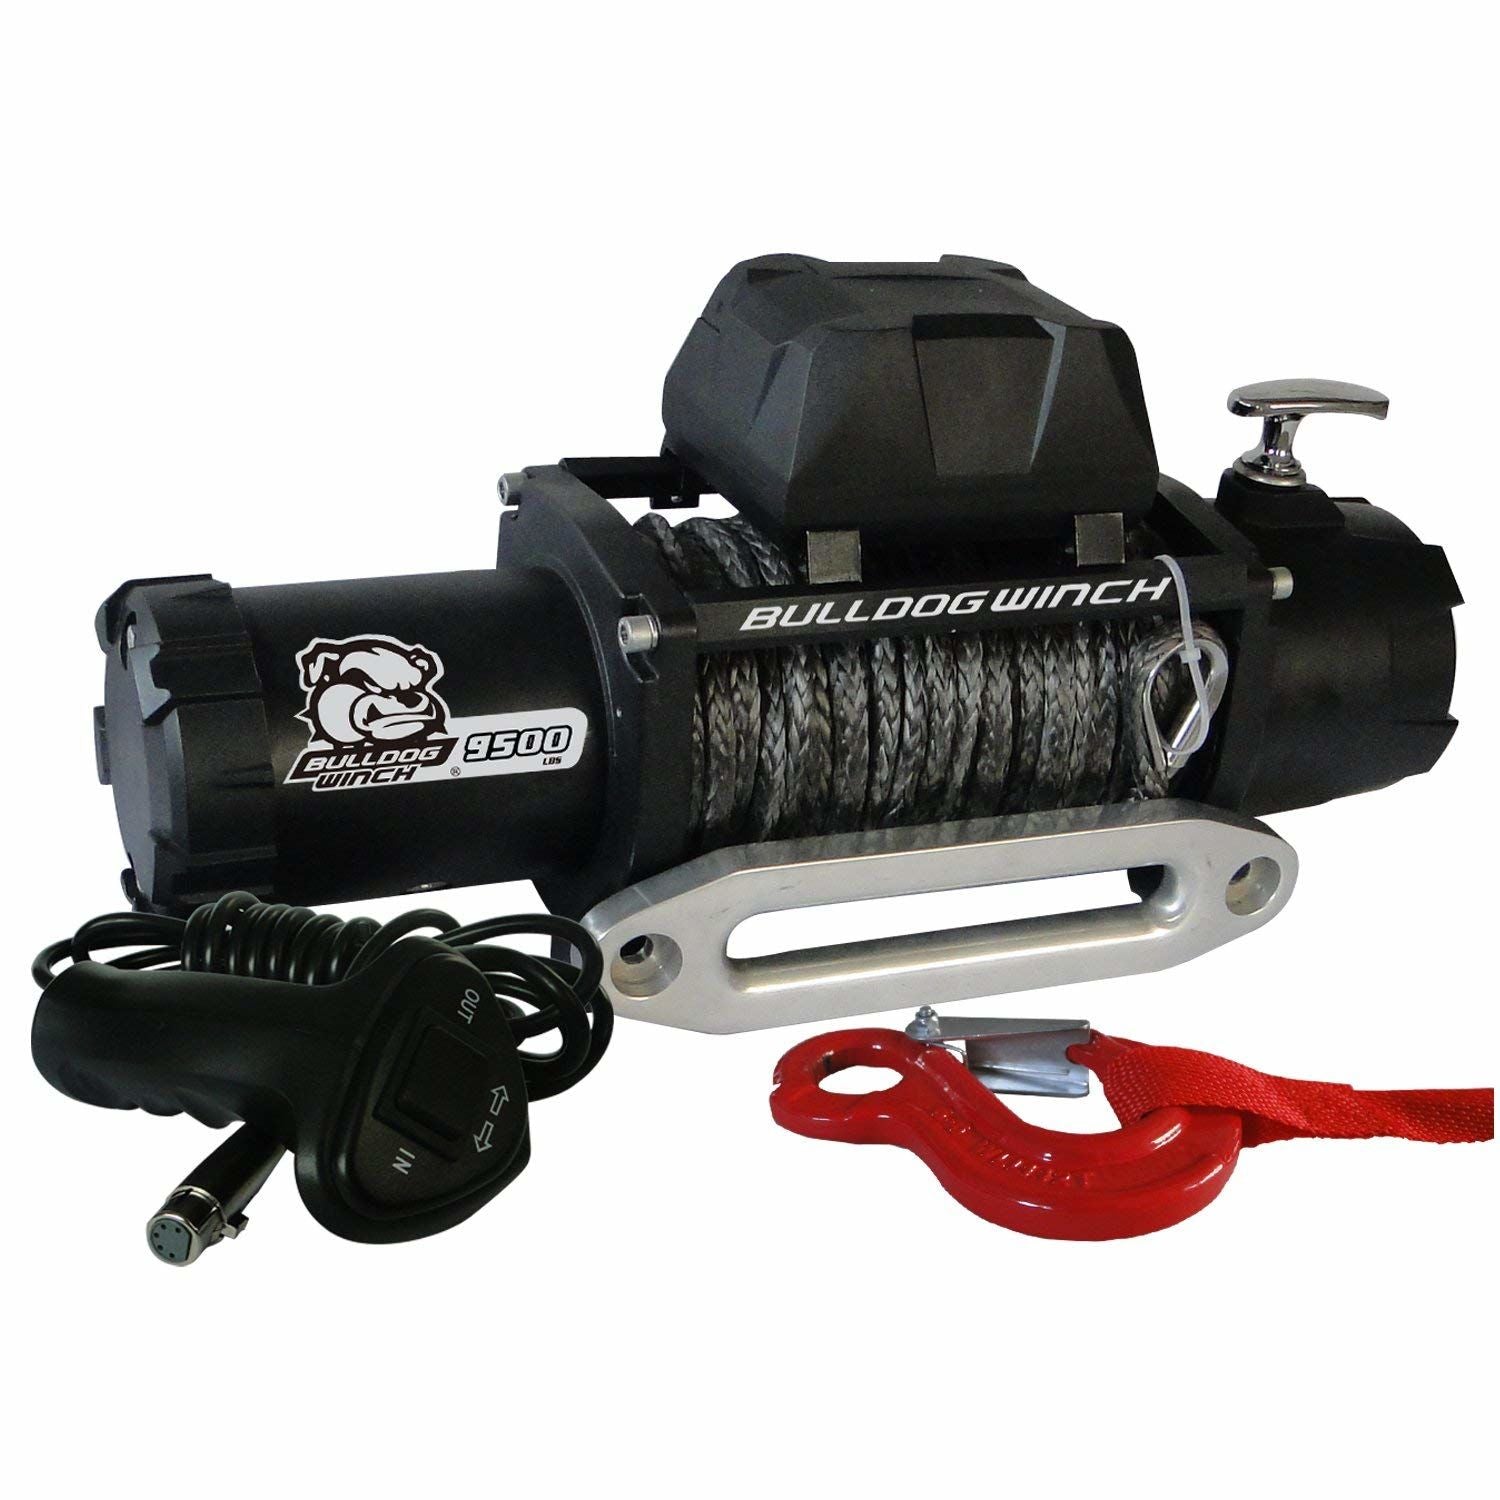 Bulldog Winch BUL10045 - 9500 lbs Standard Series Electric Winch with Synthetic Rope